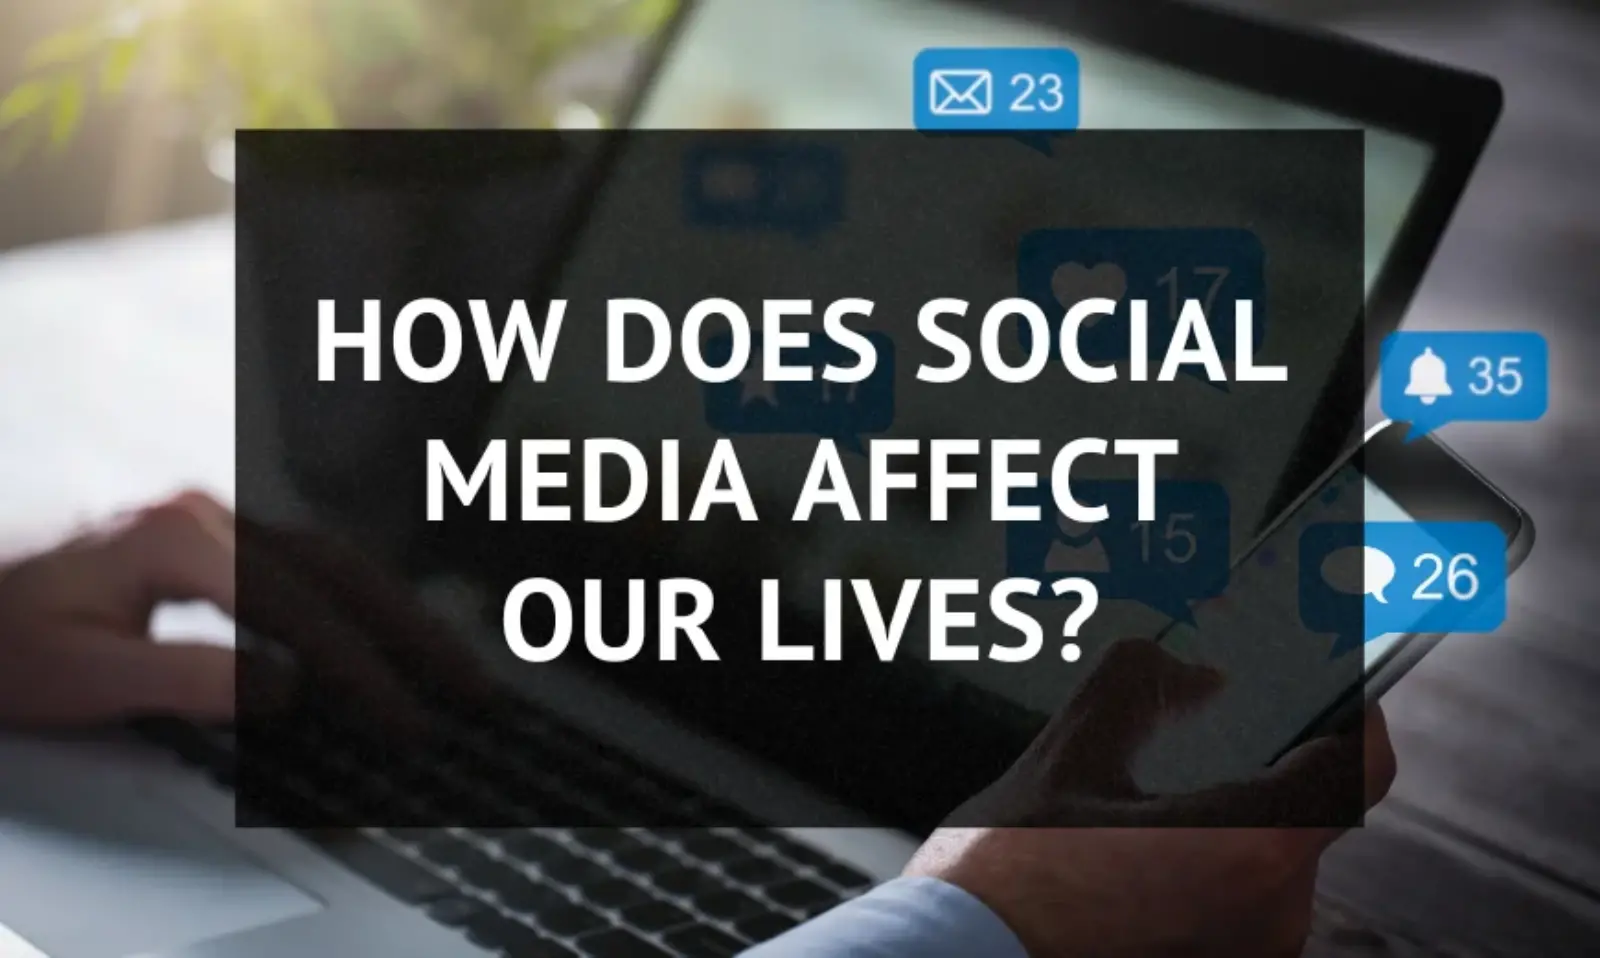 How does social media affect our lives?